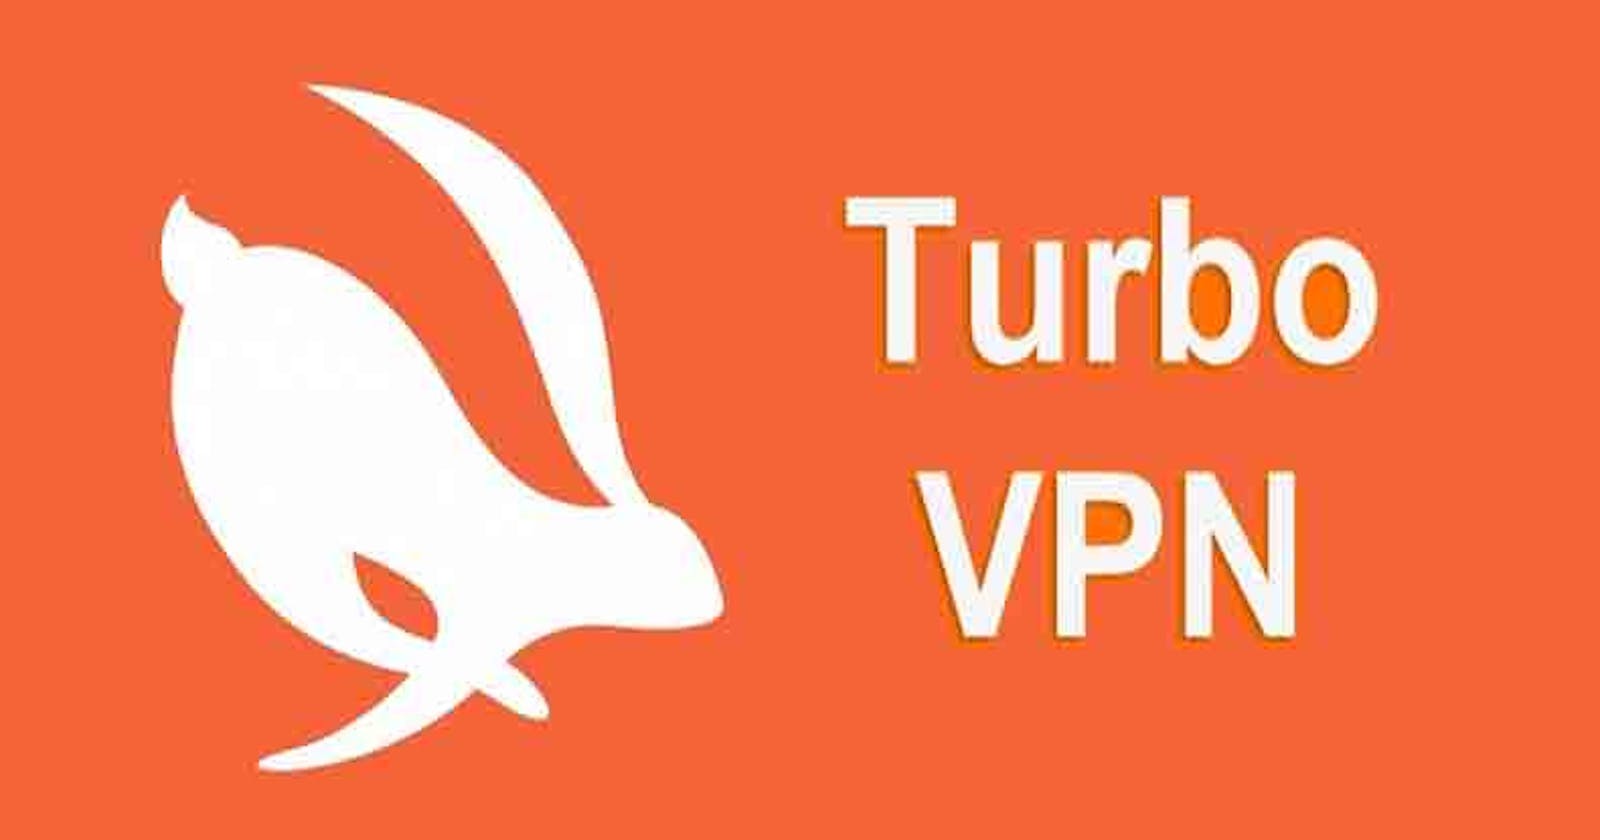 Download Turbo VPN for PC With Fast and Secure Connection App